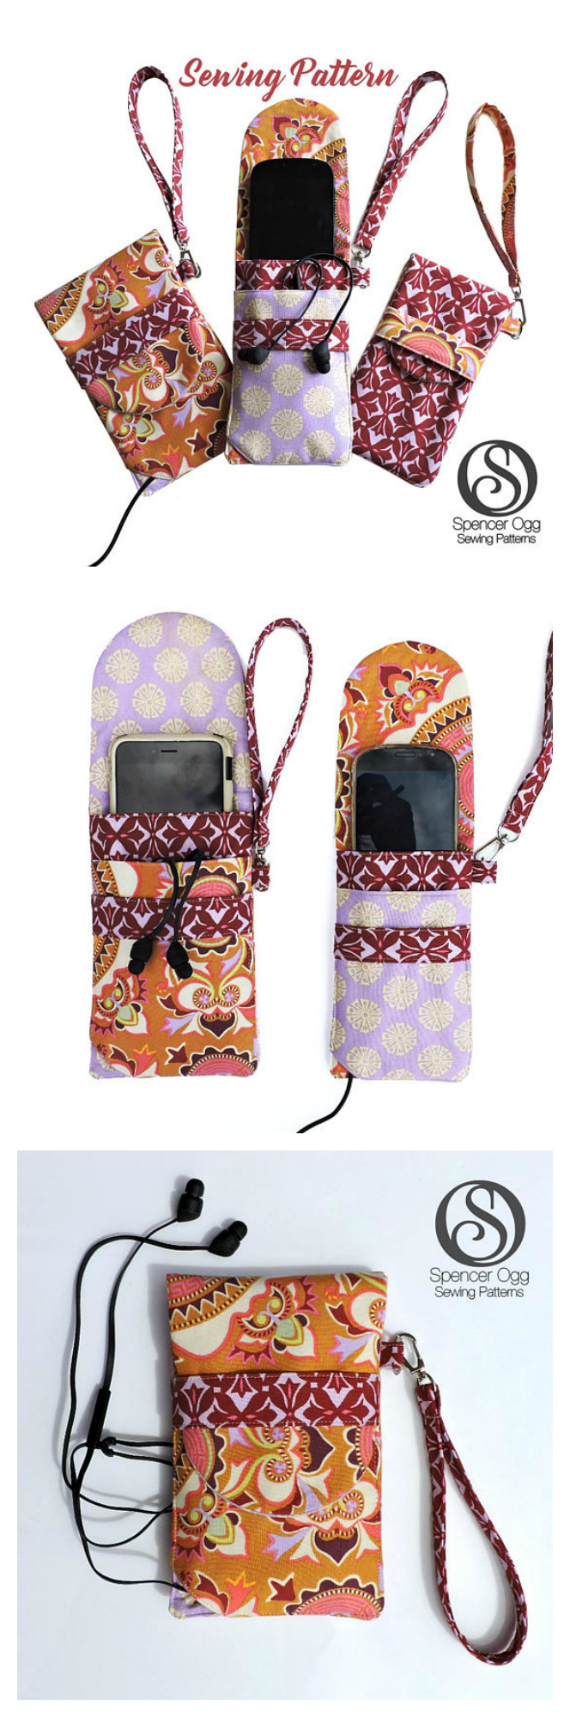 Keeping your phone safe and damage free is very important these days. Here's a really great pdf pattern for a trendy looking Phone Pouch, with earbud pocket and inlet for a headphone jack.